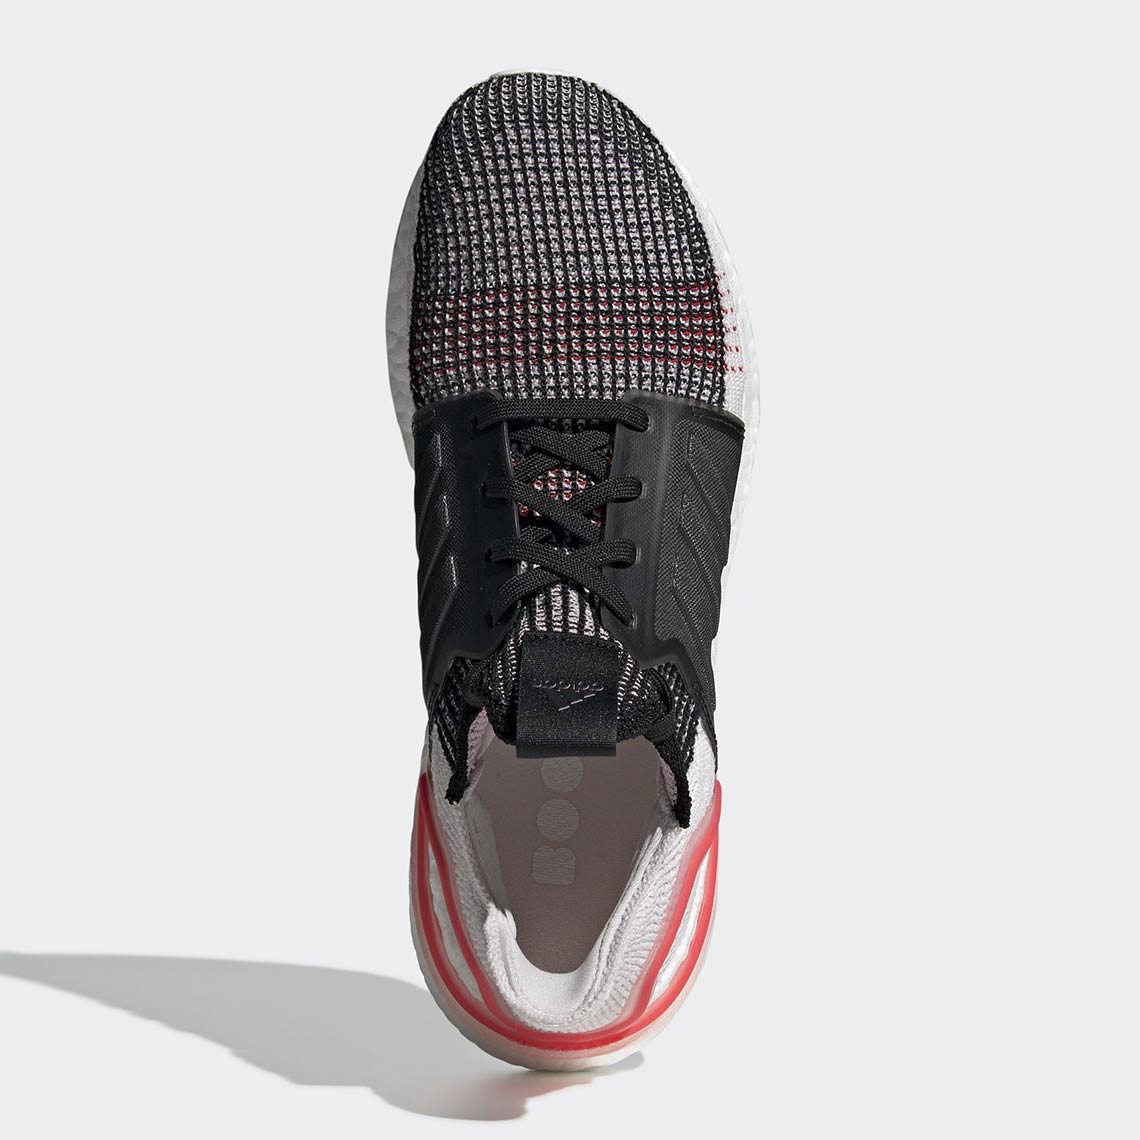 Adidas Ultra Boost 2019 Laser Red F35238 4